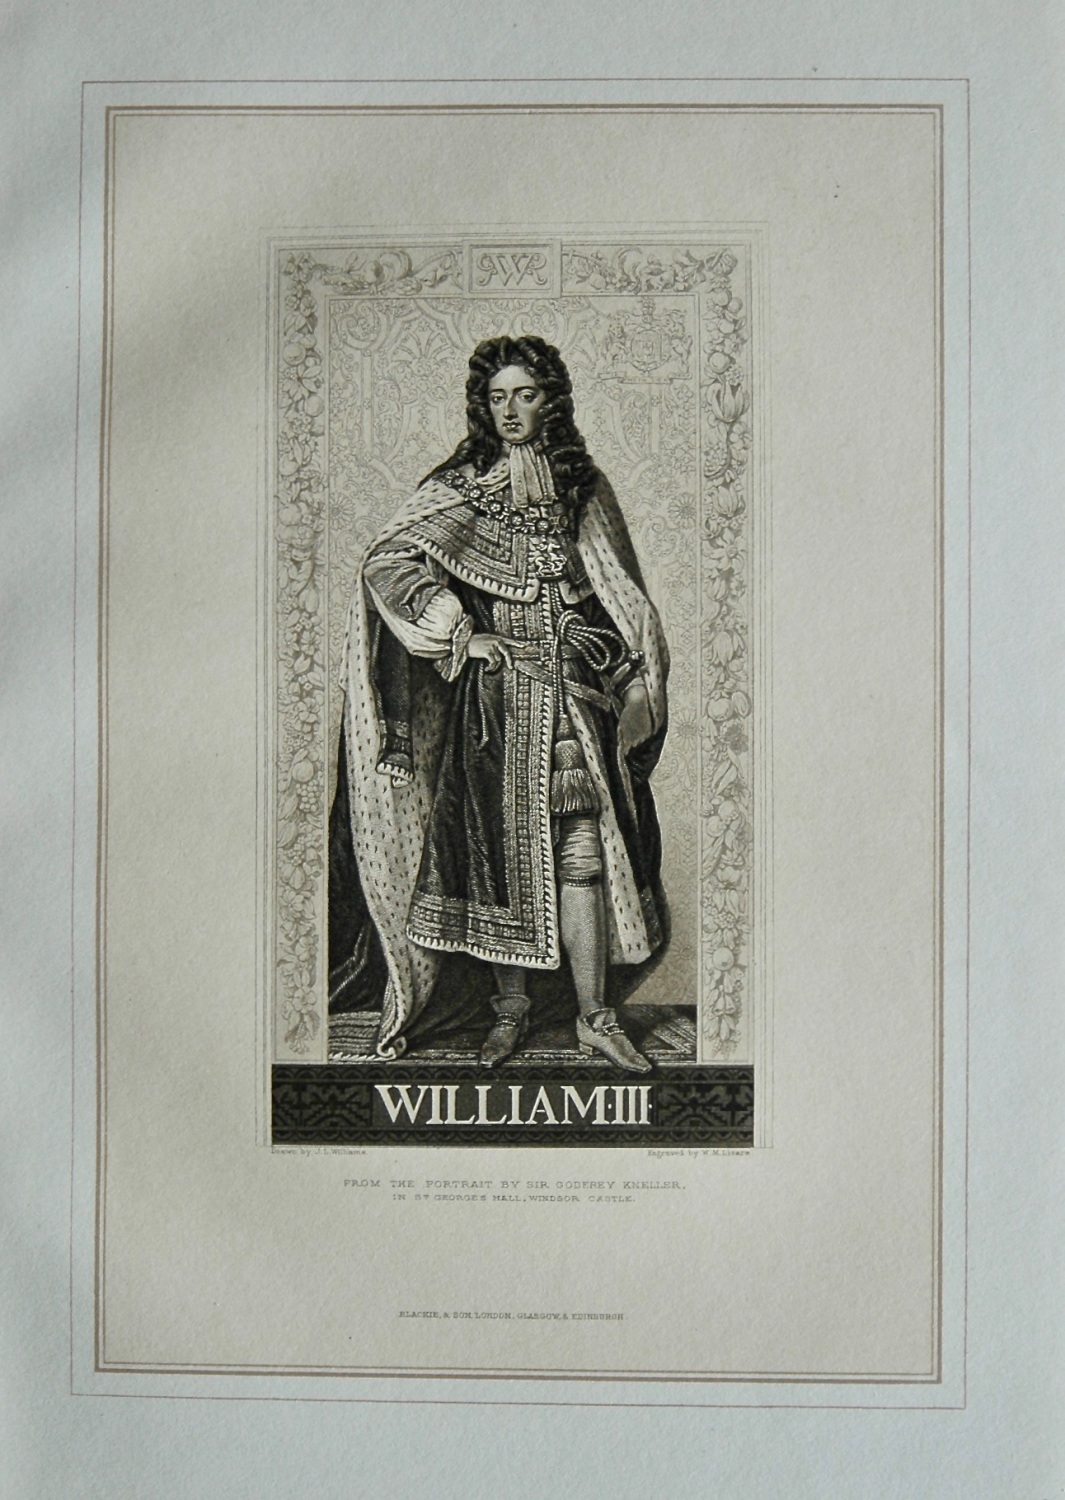 William III. (From the Portrait by Sir Godfrey Kneller, in St. George's Hal